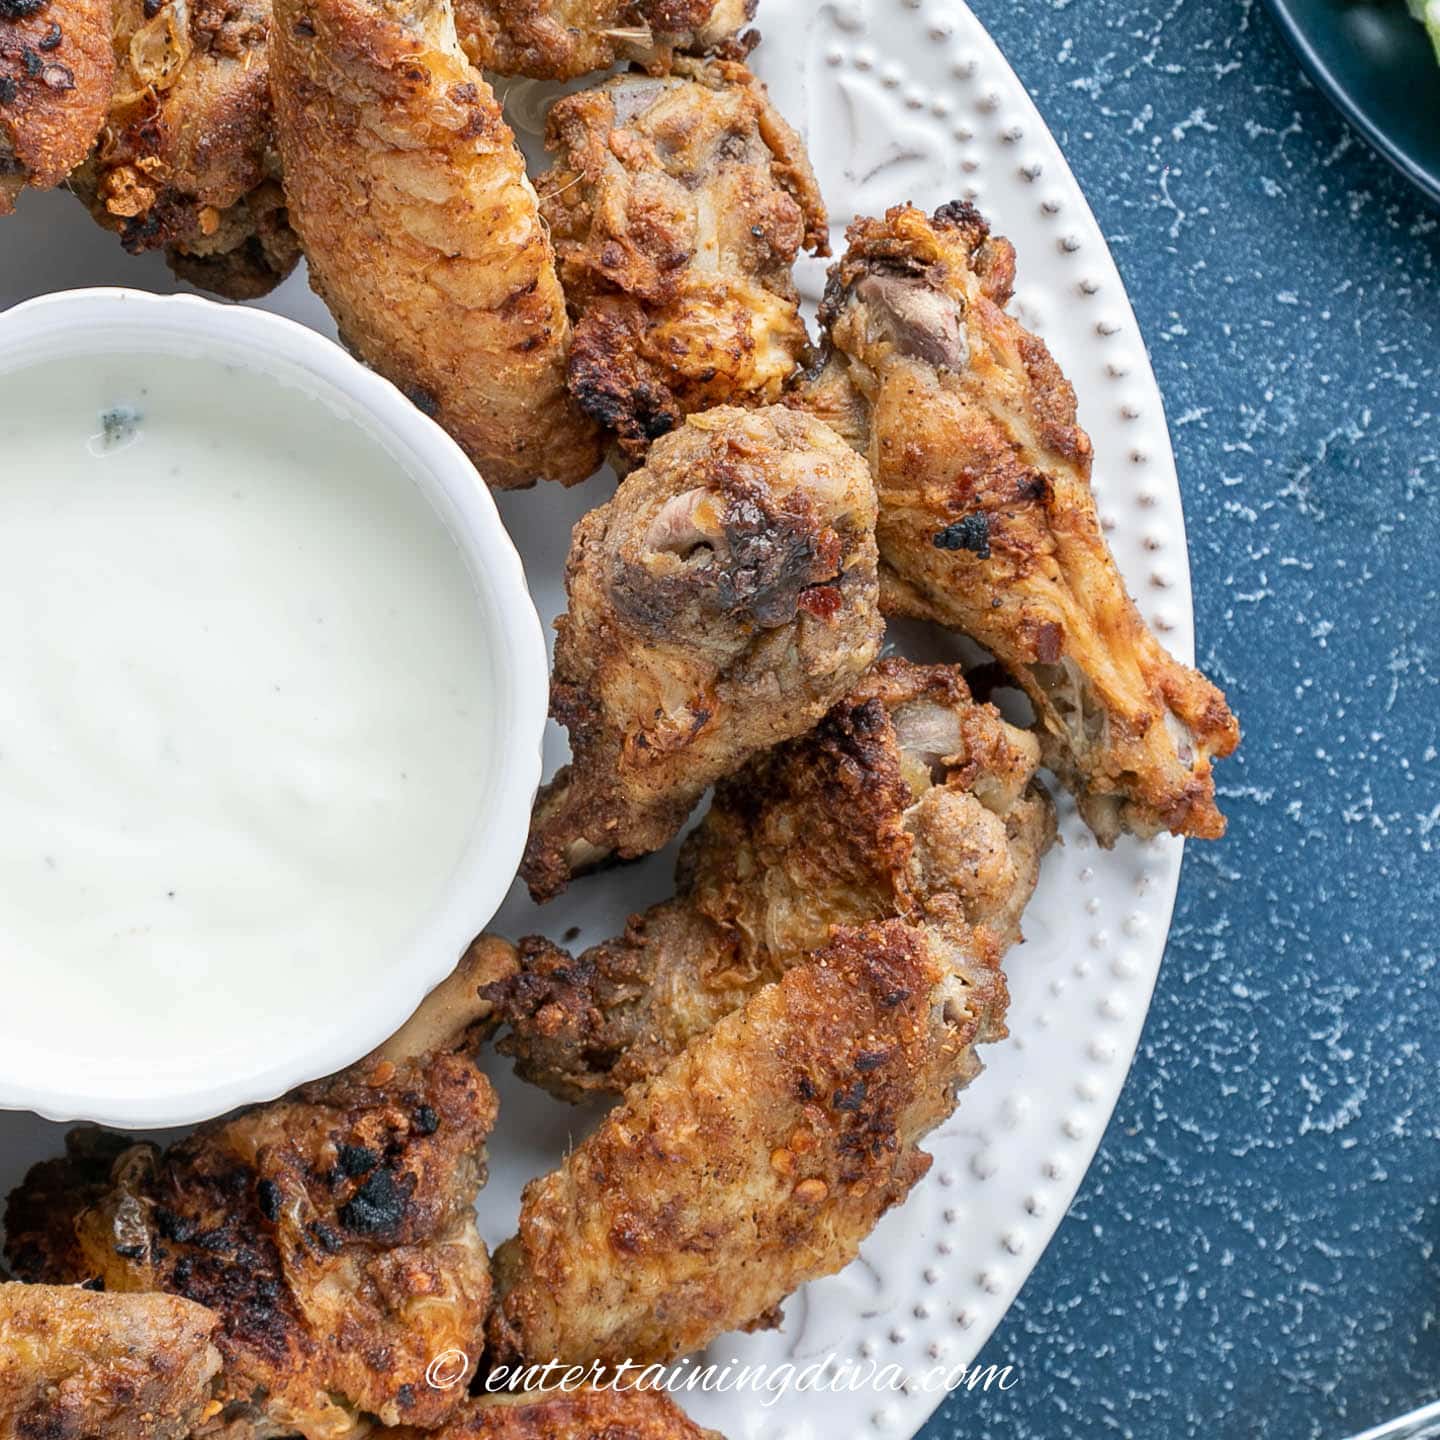 a plate of marinated spicy chicken wings with blue cheese dressing on the side